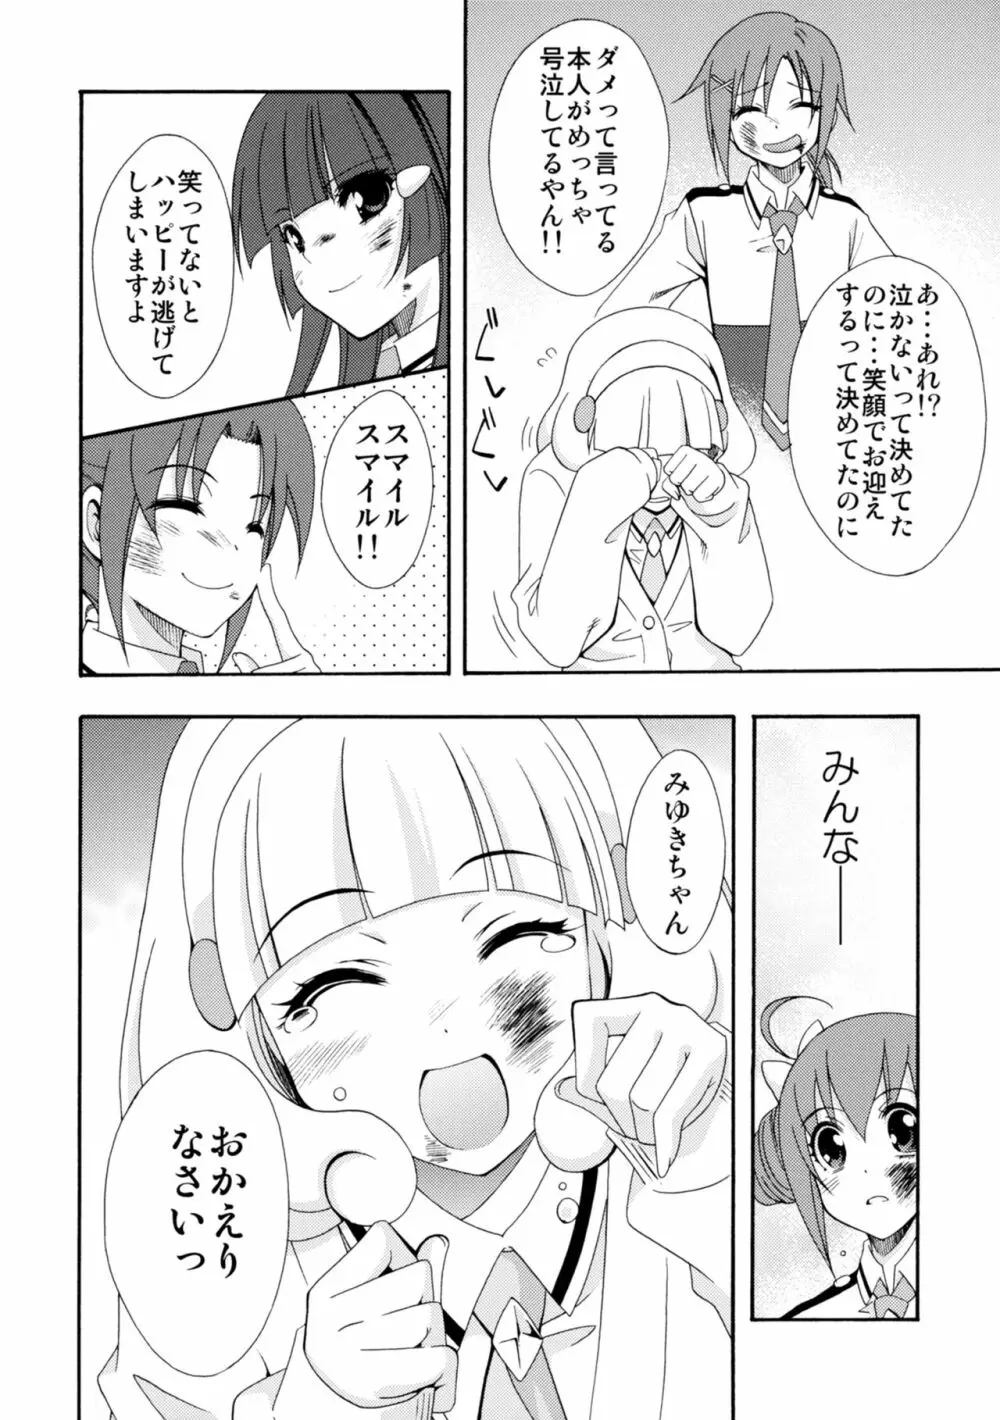 SMILES AND TEARS Vol.02 57ページ